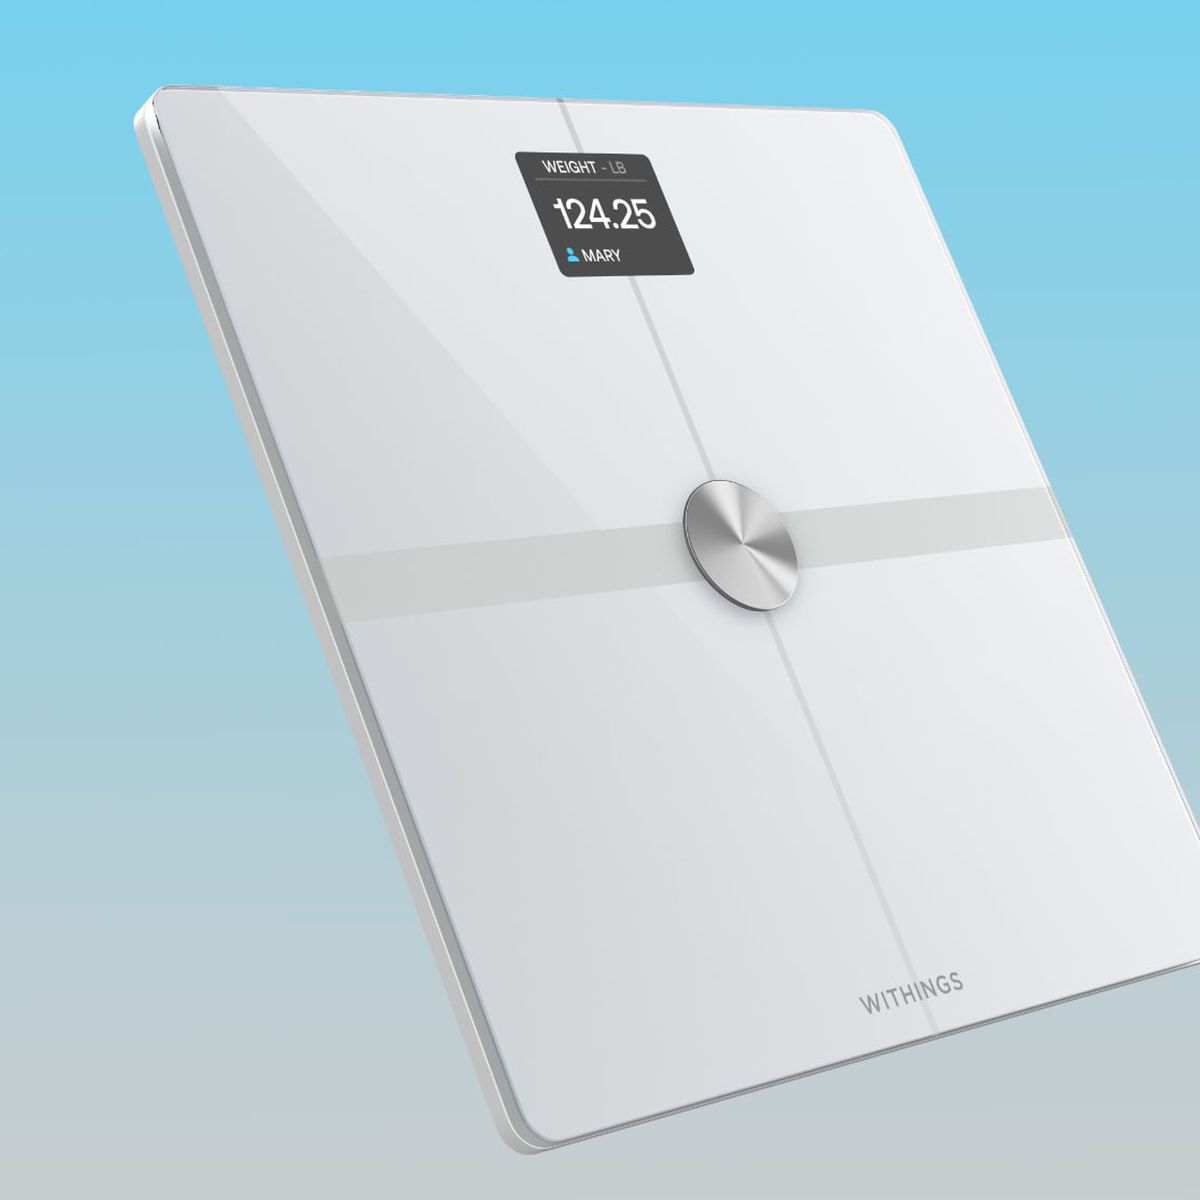 Withings Launches New iPhone-Connected Smart Scale With 'Eyes Closed' Mode  - MacRumors